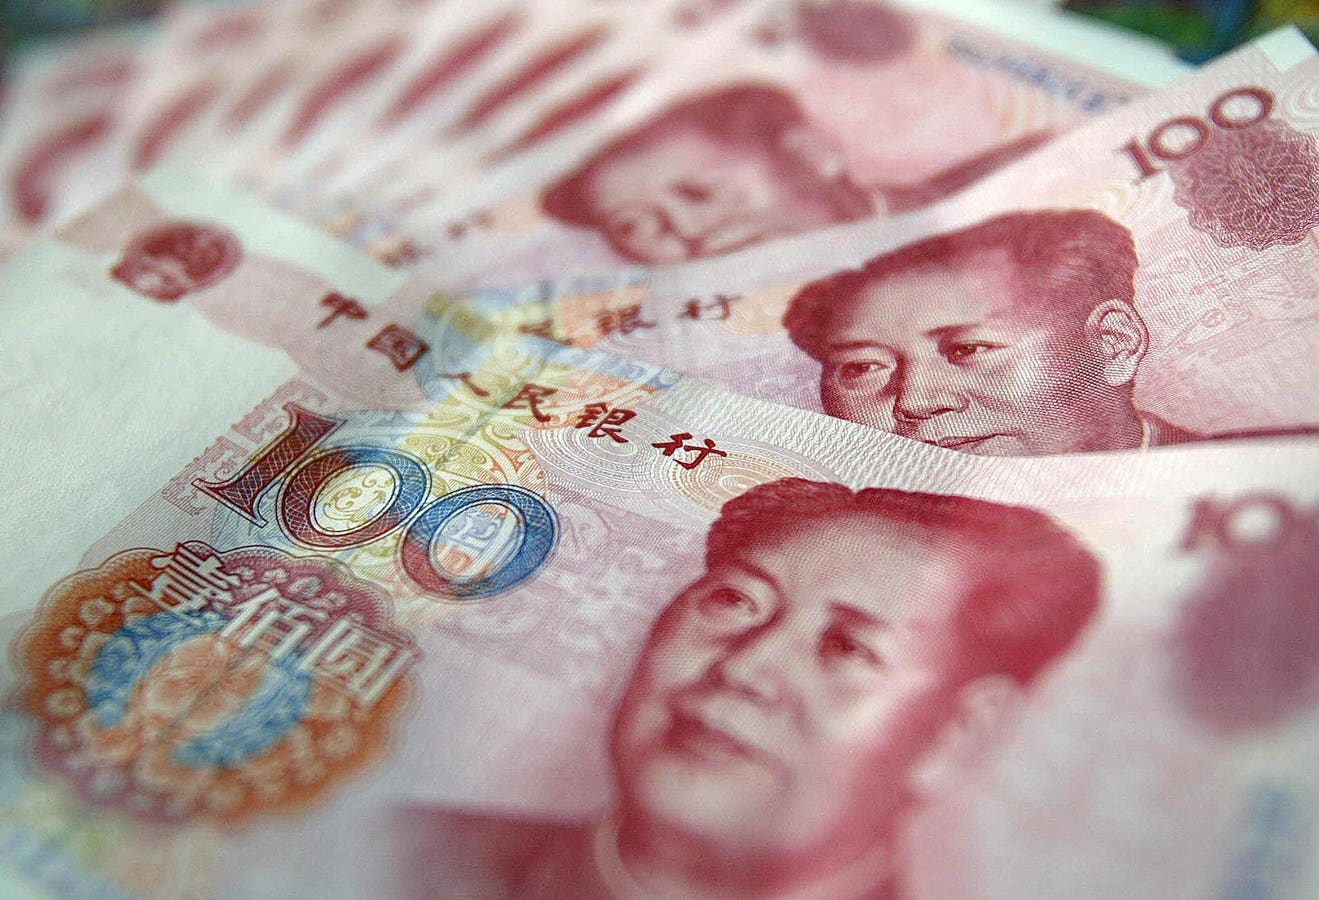 Middle East Investors Eye Chinese Currency Assets As Ties Deepen